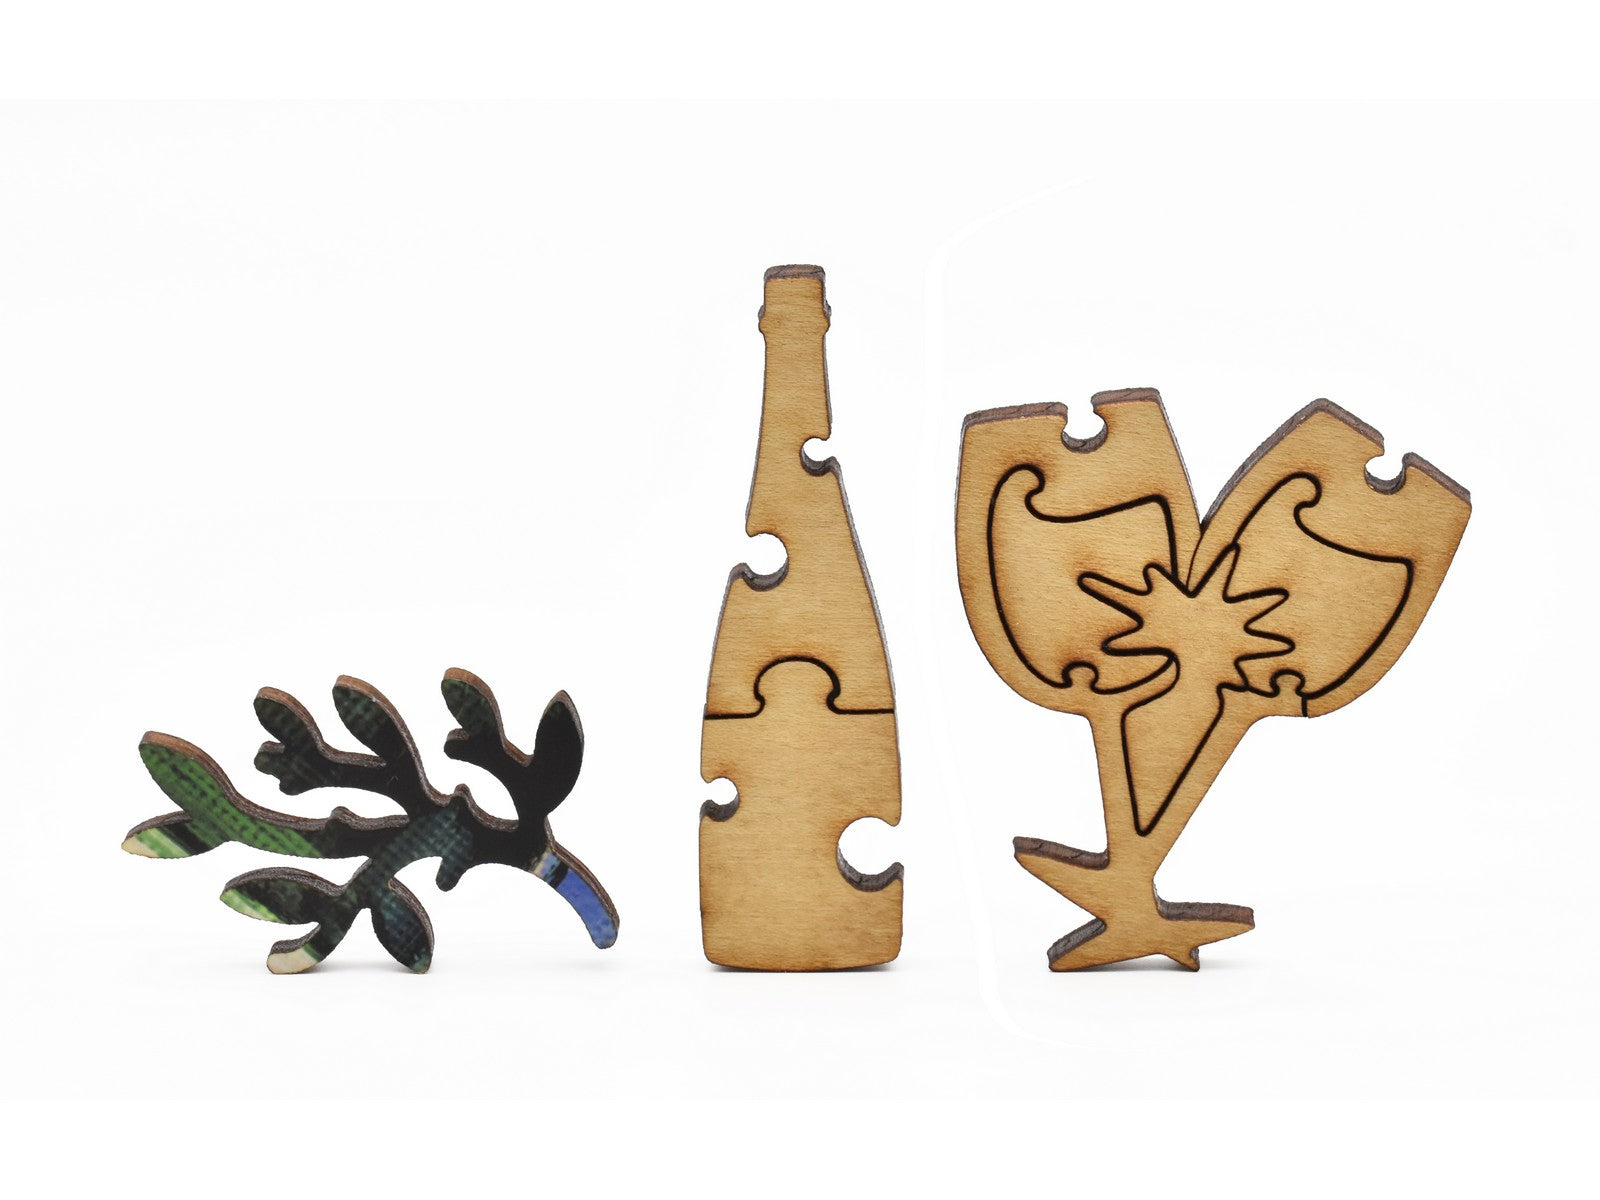 A closeup of pieces in the shape of champagne, glasses, and a branch.